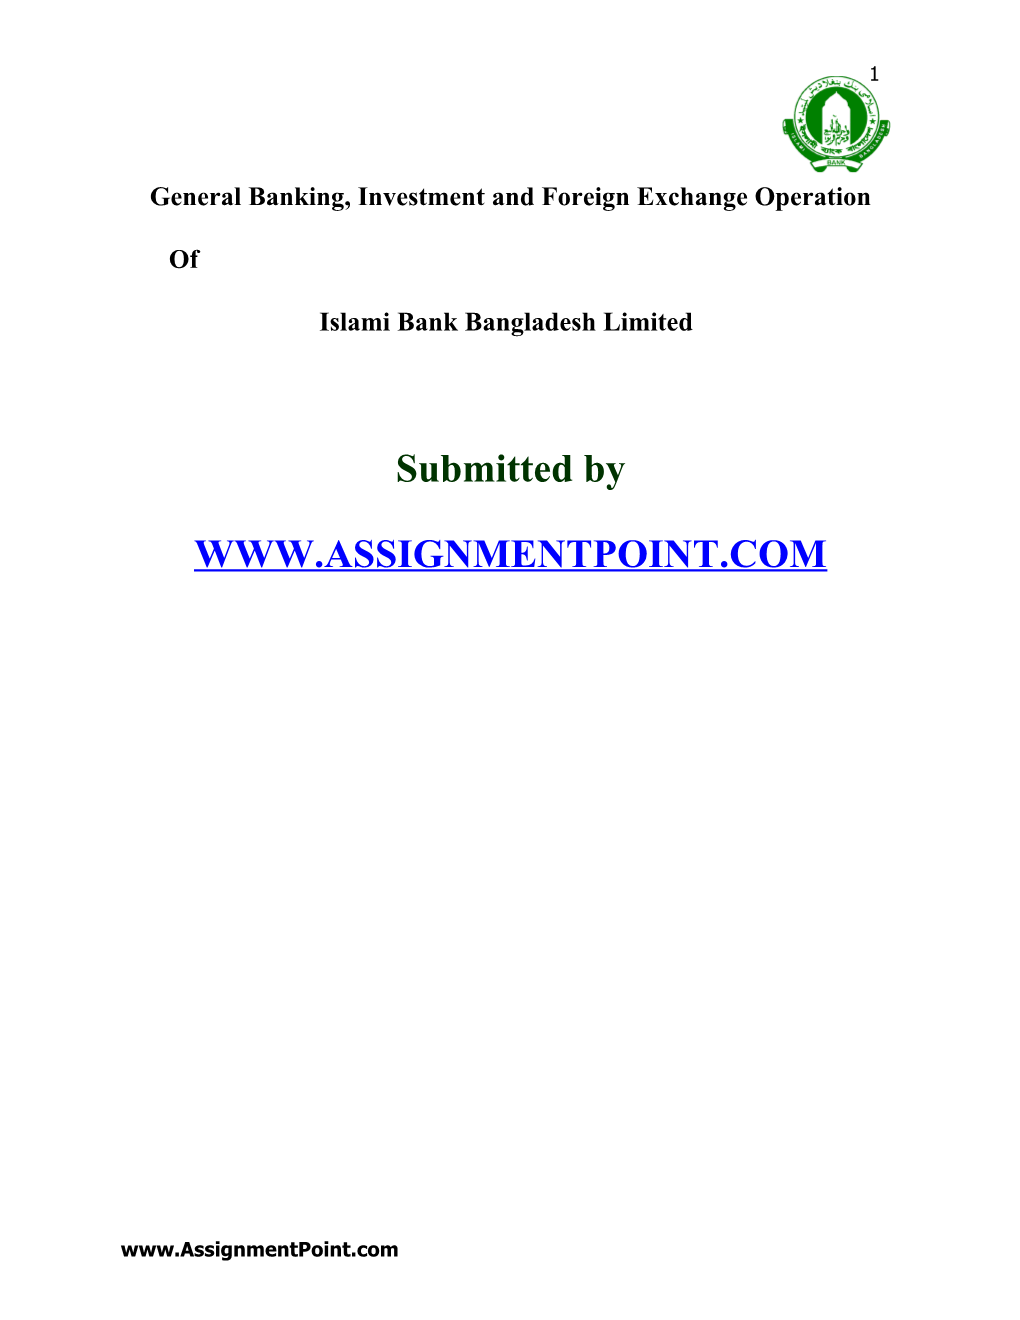 General Banking, Investment and Foreign Exchange Operation